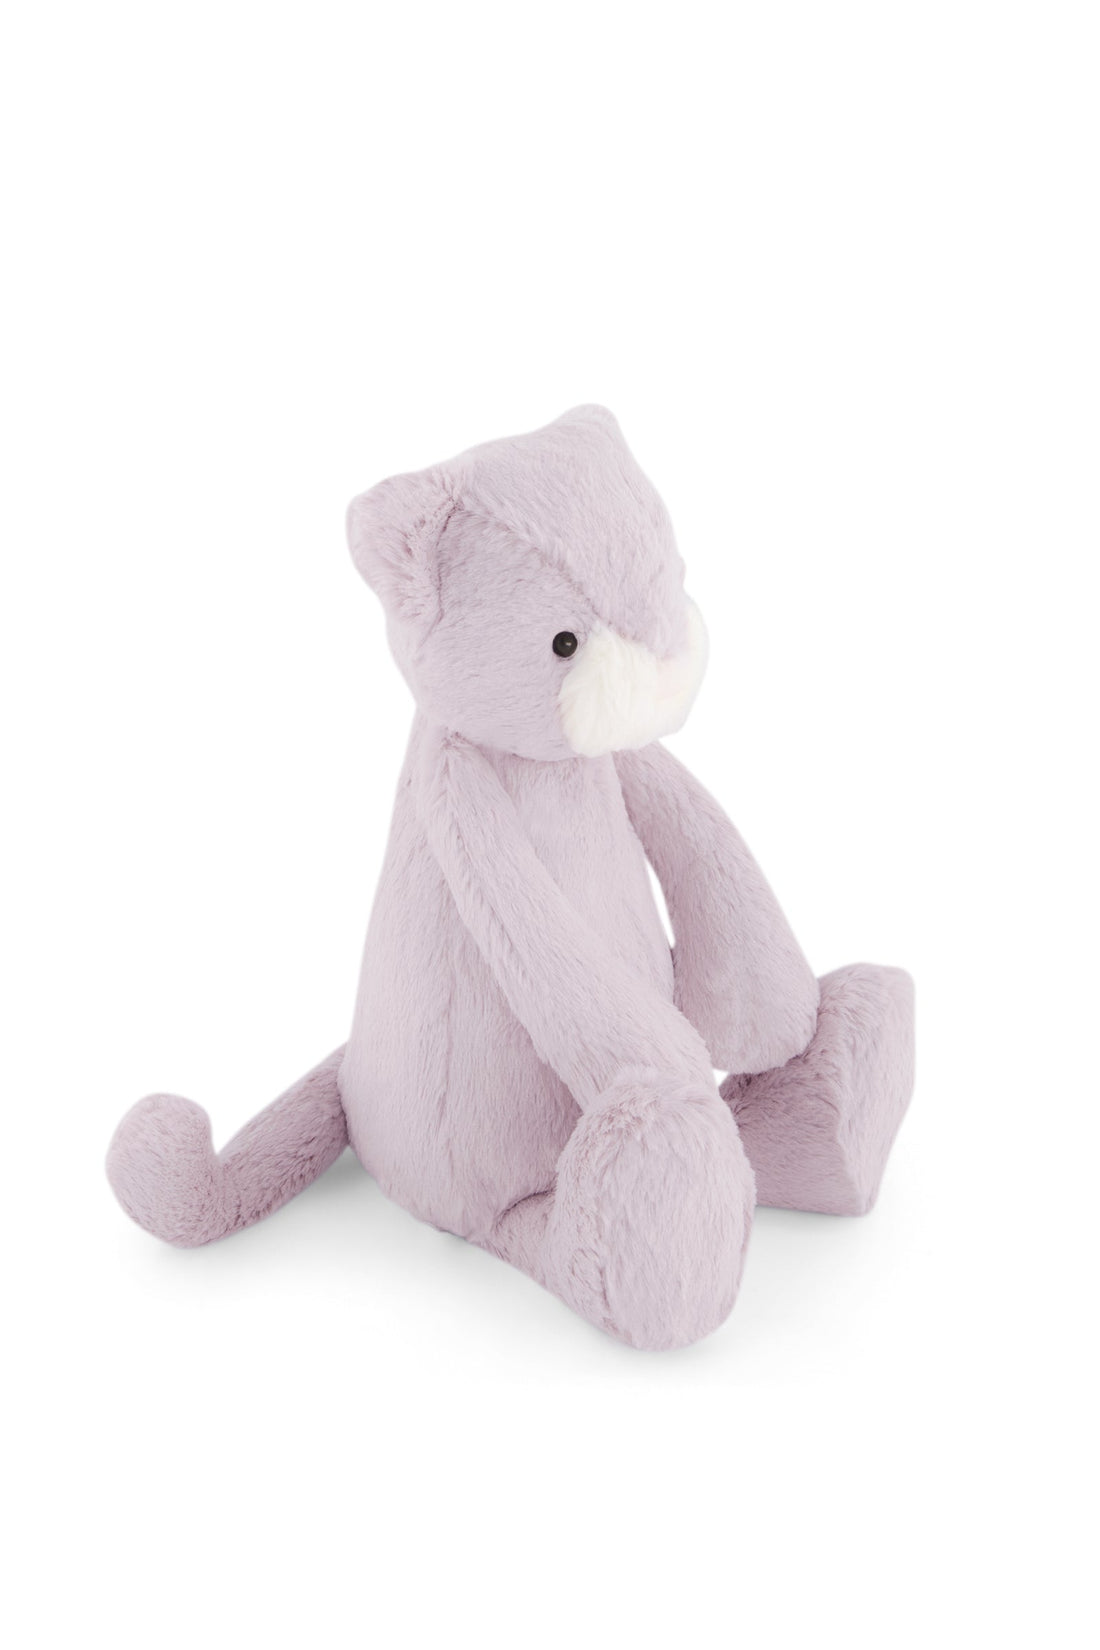 Snuggle Bunnies - Elsie the Kitty - Violet Childrens Toy from Jamie Kay USA